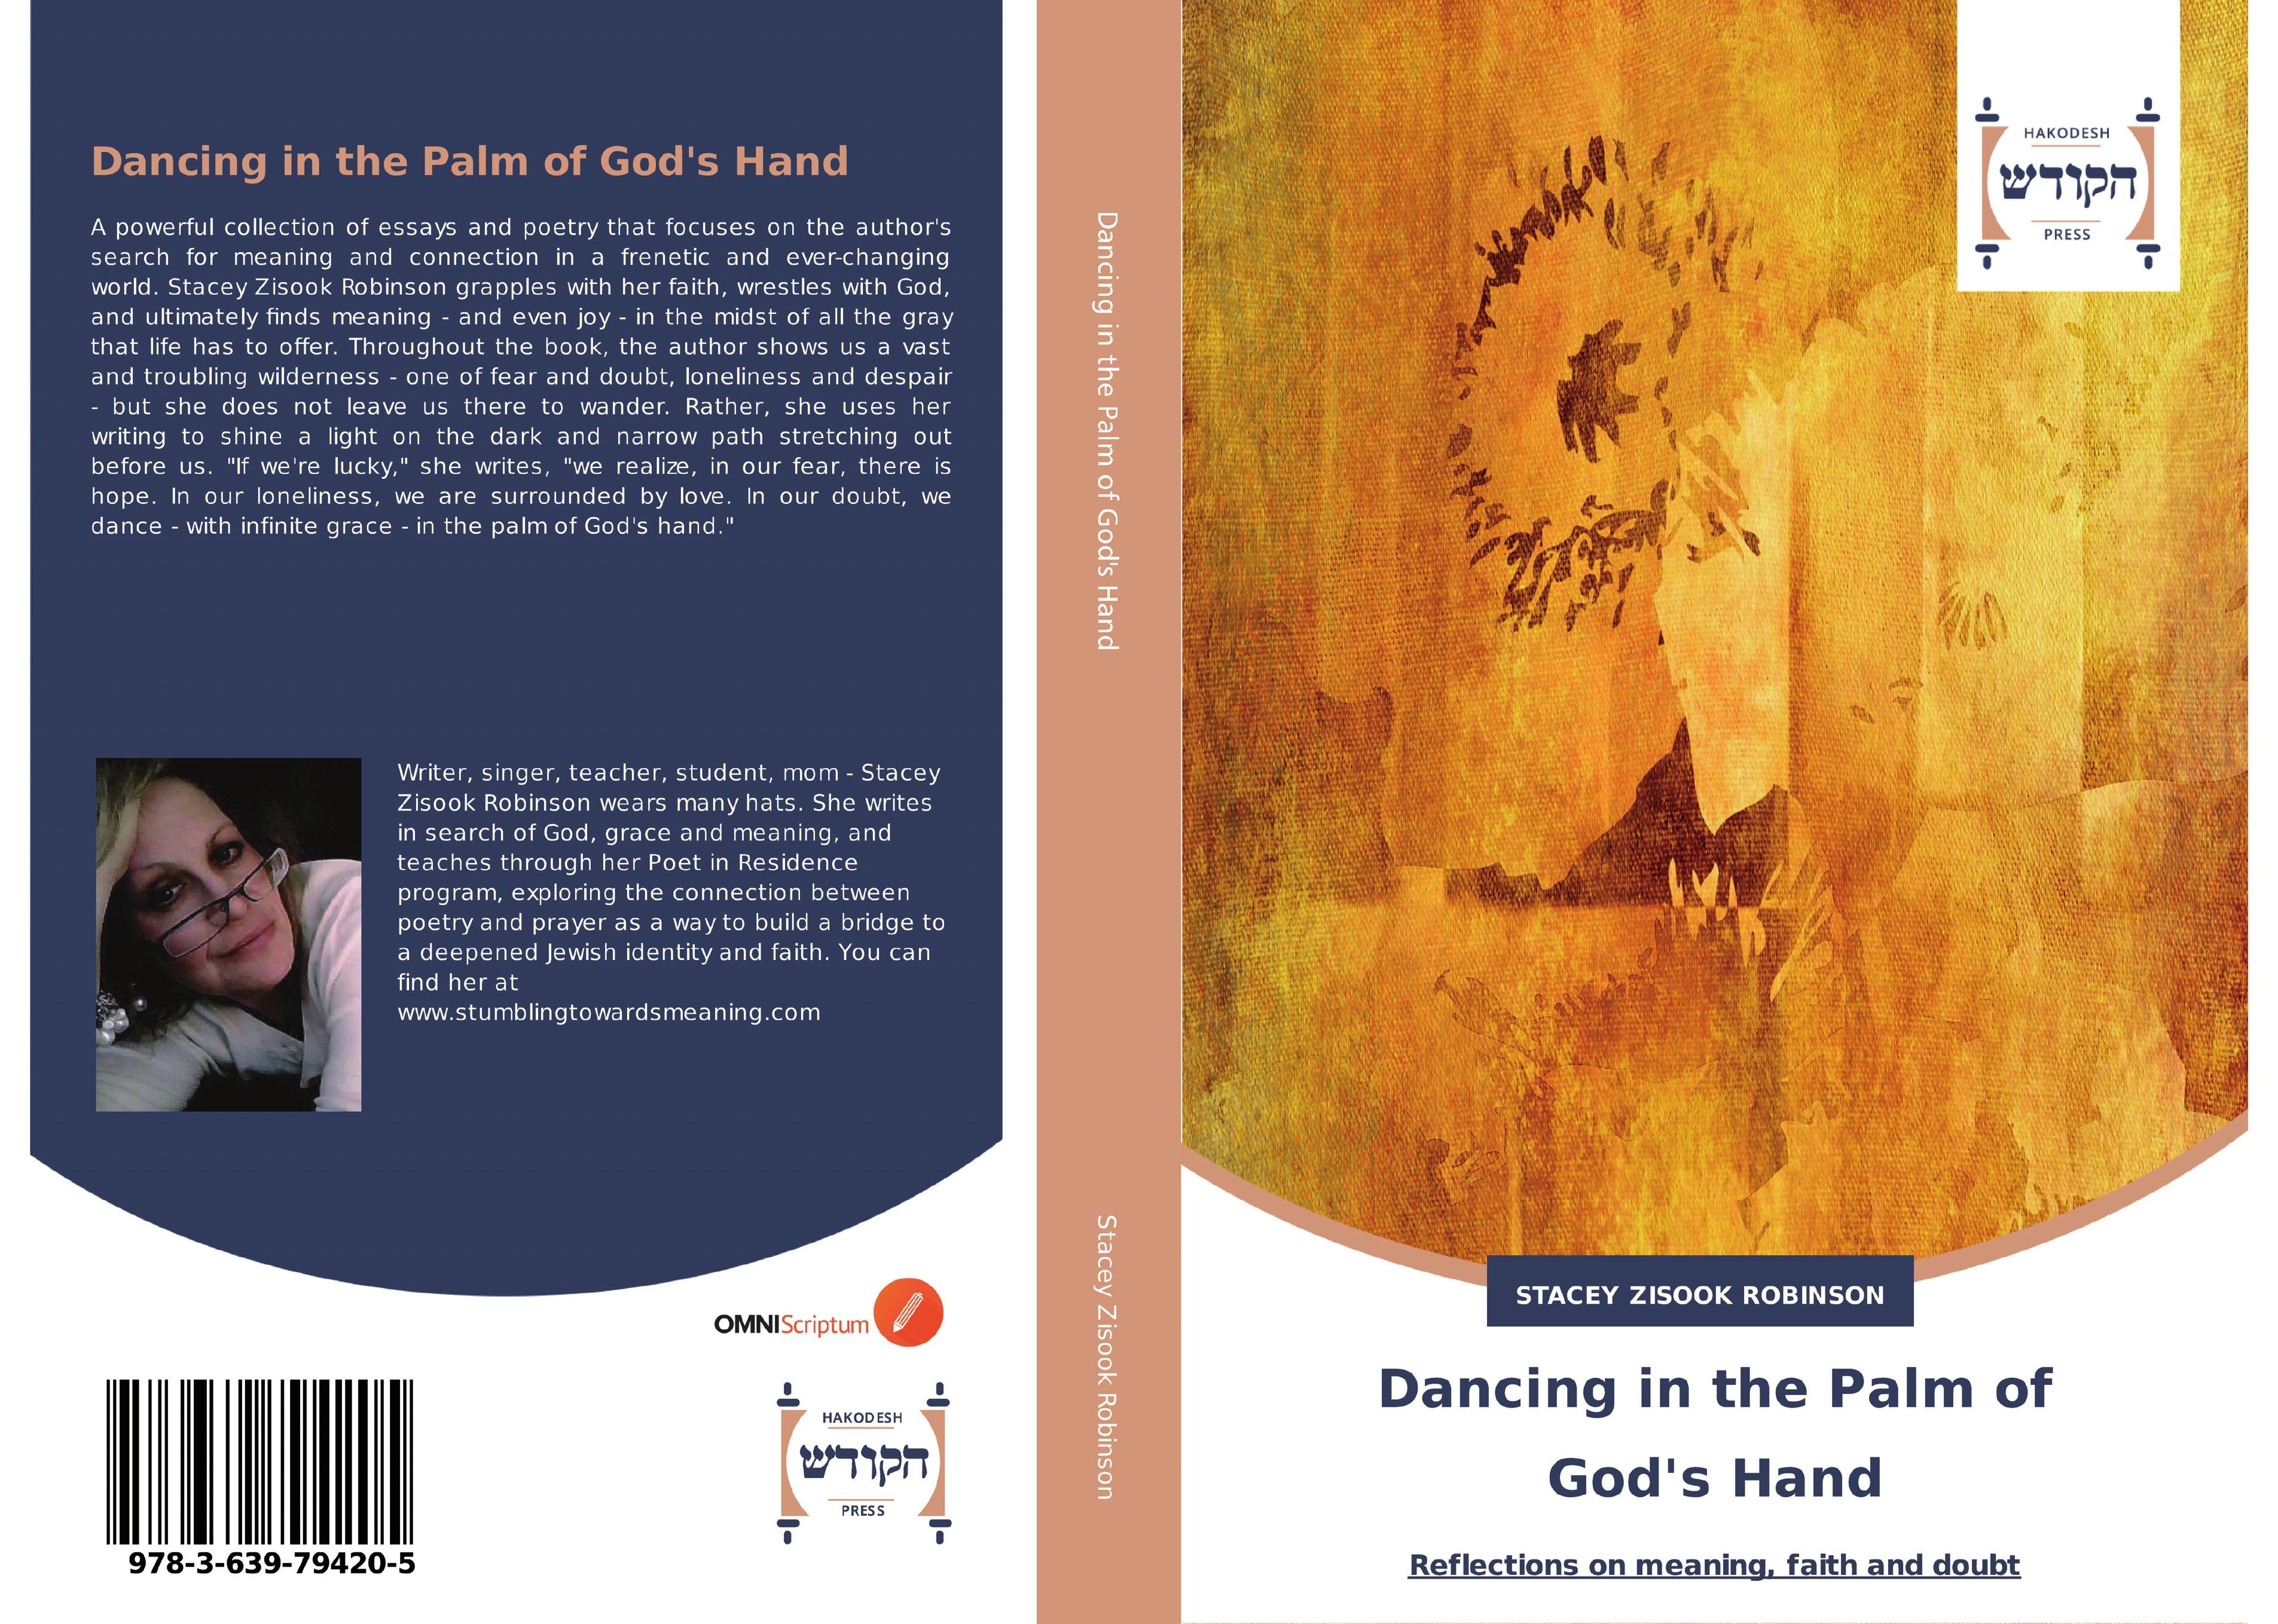 Dancing in the Palm of God's Hand | Reflections on meaning, faith and doubt | Stacey Zisook Robinson | Taschenbuch | Paperback | 208 S. | Englisch | 2015 | Hakodesh Press | EAN 9783639794205 - Zisook Robinson, Stacey